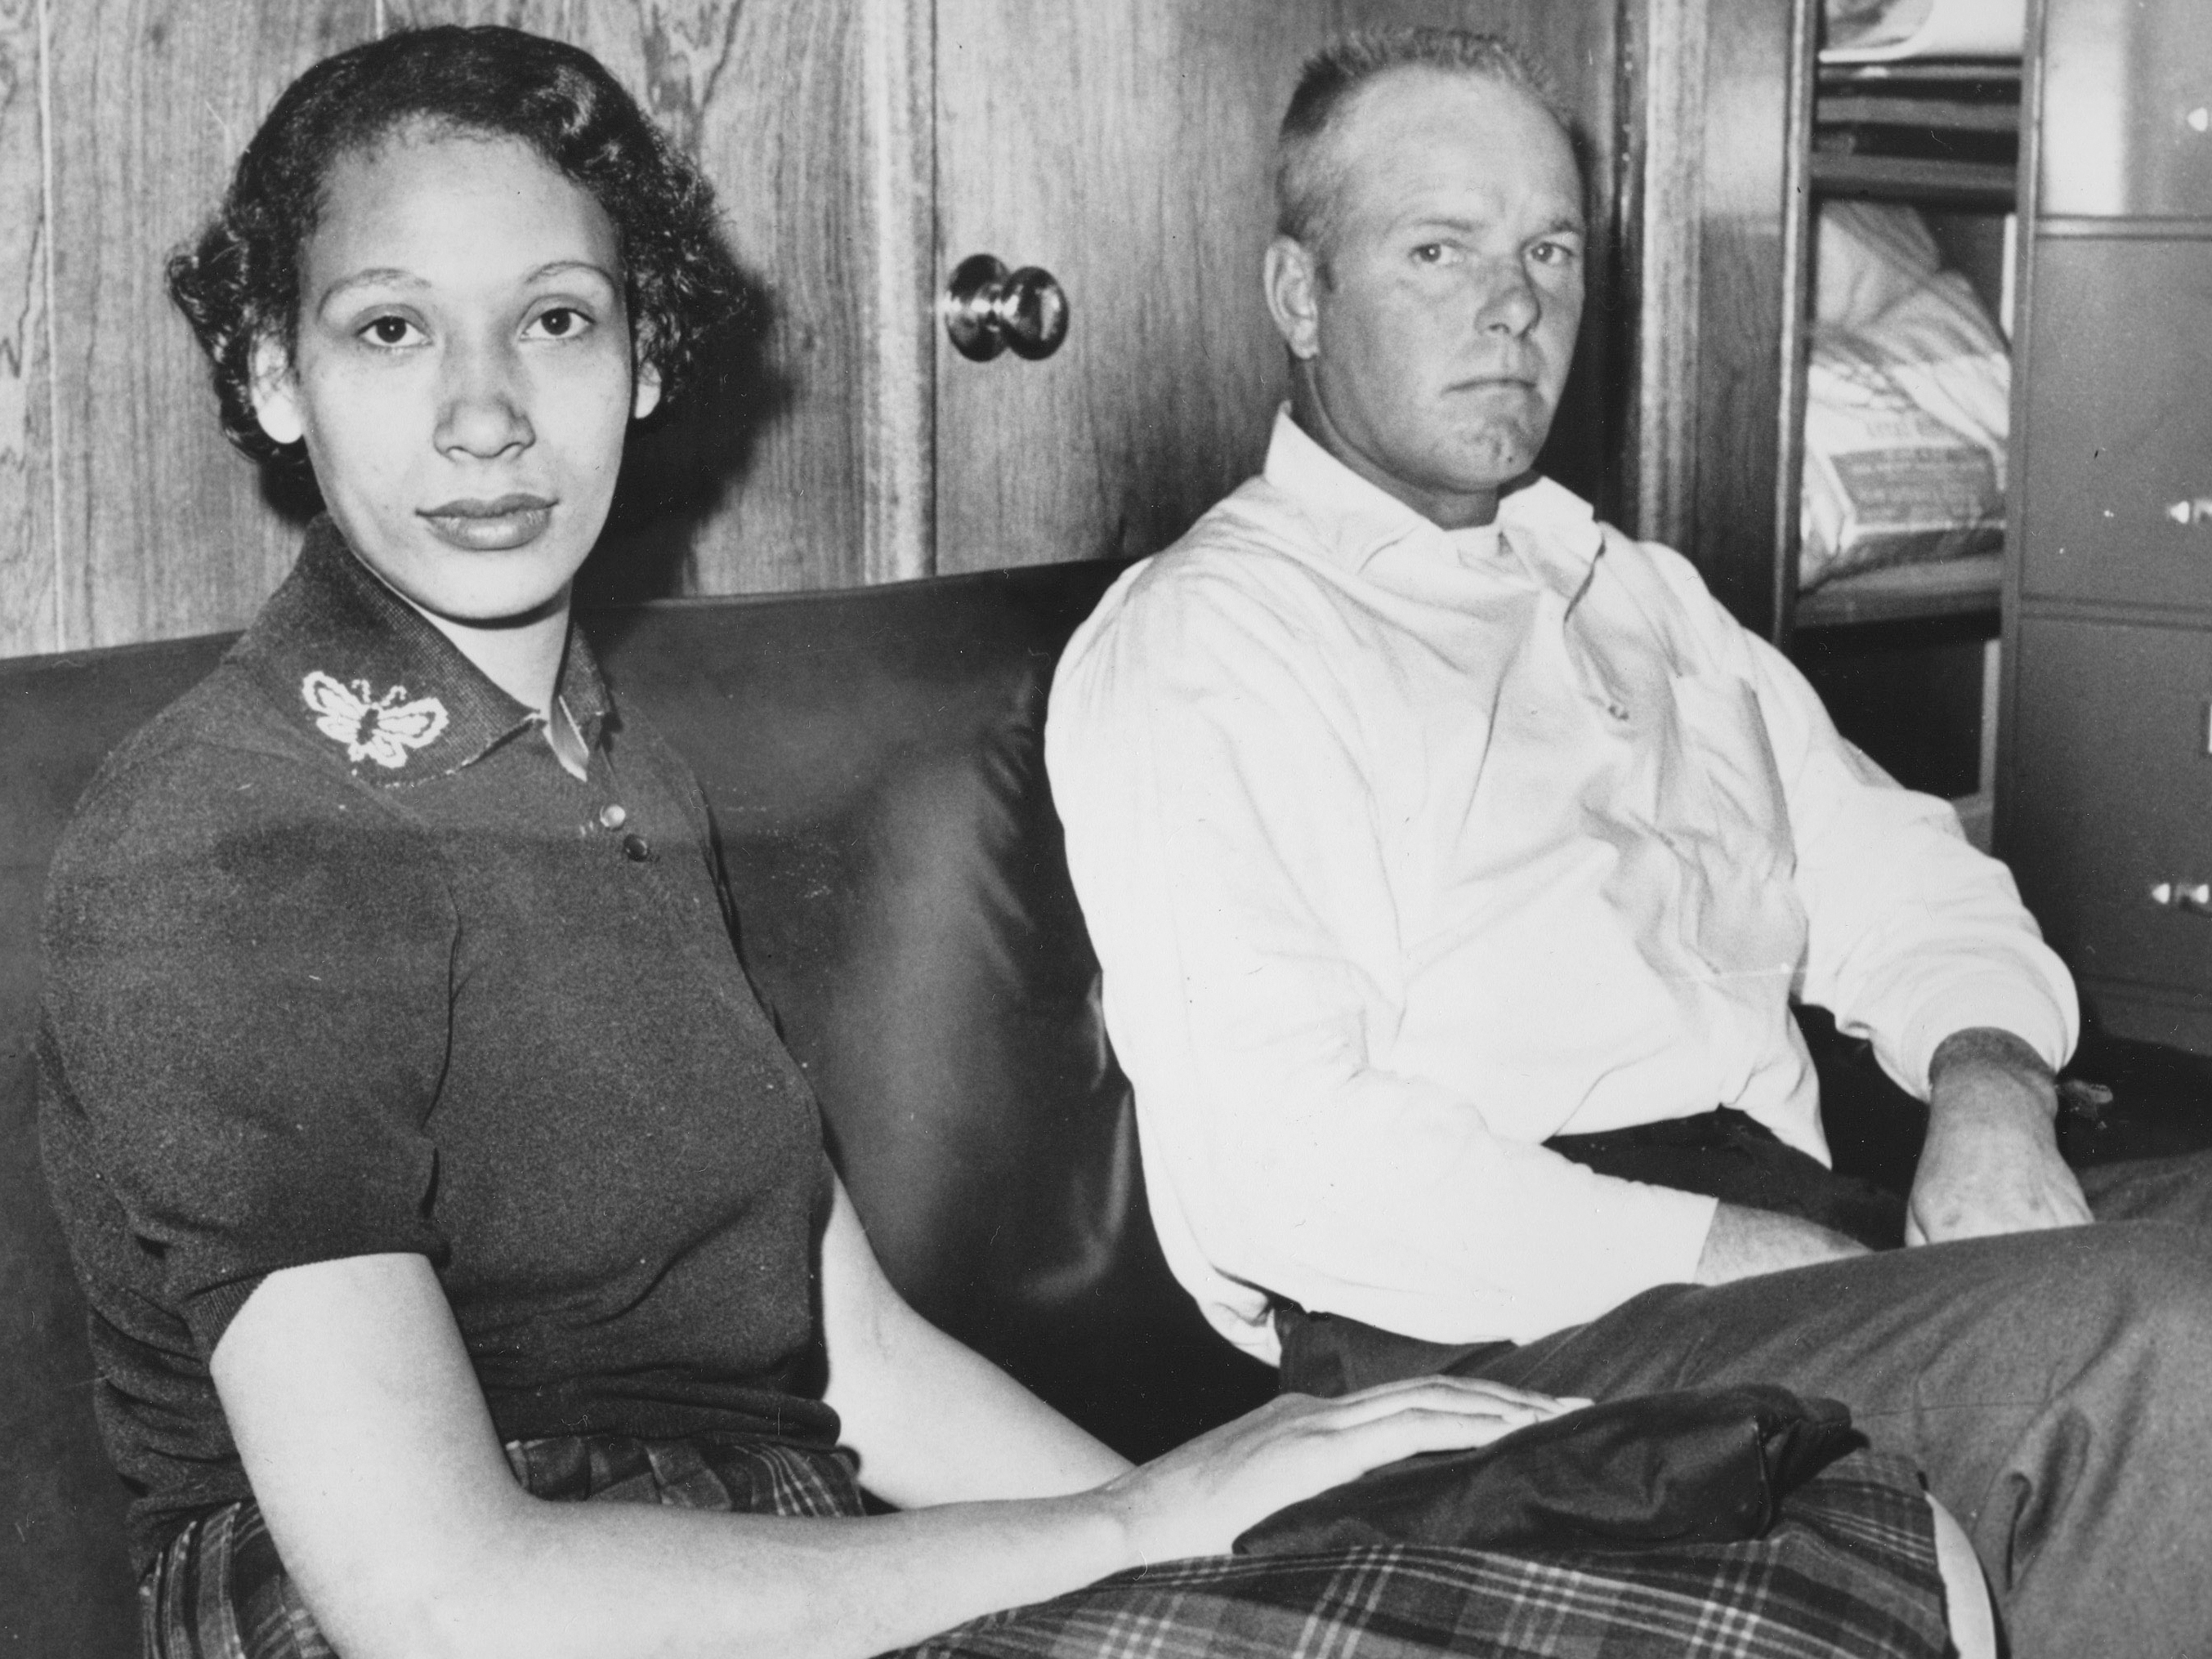 June 12 is Loving Day — when interracial marriage finally became legal in the U.S. picture